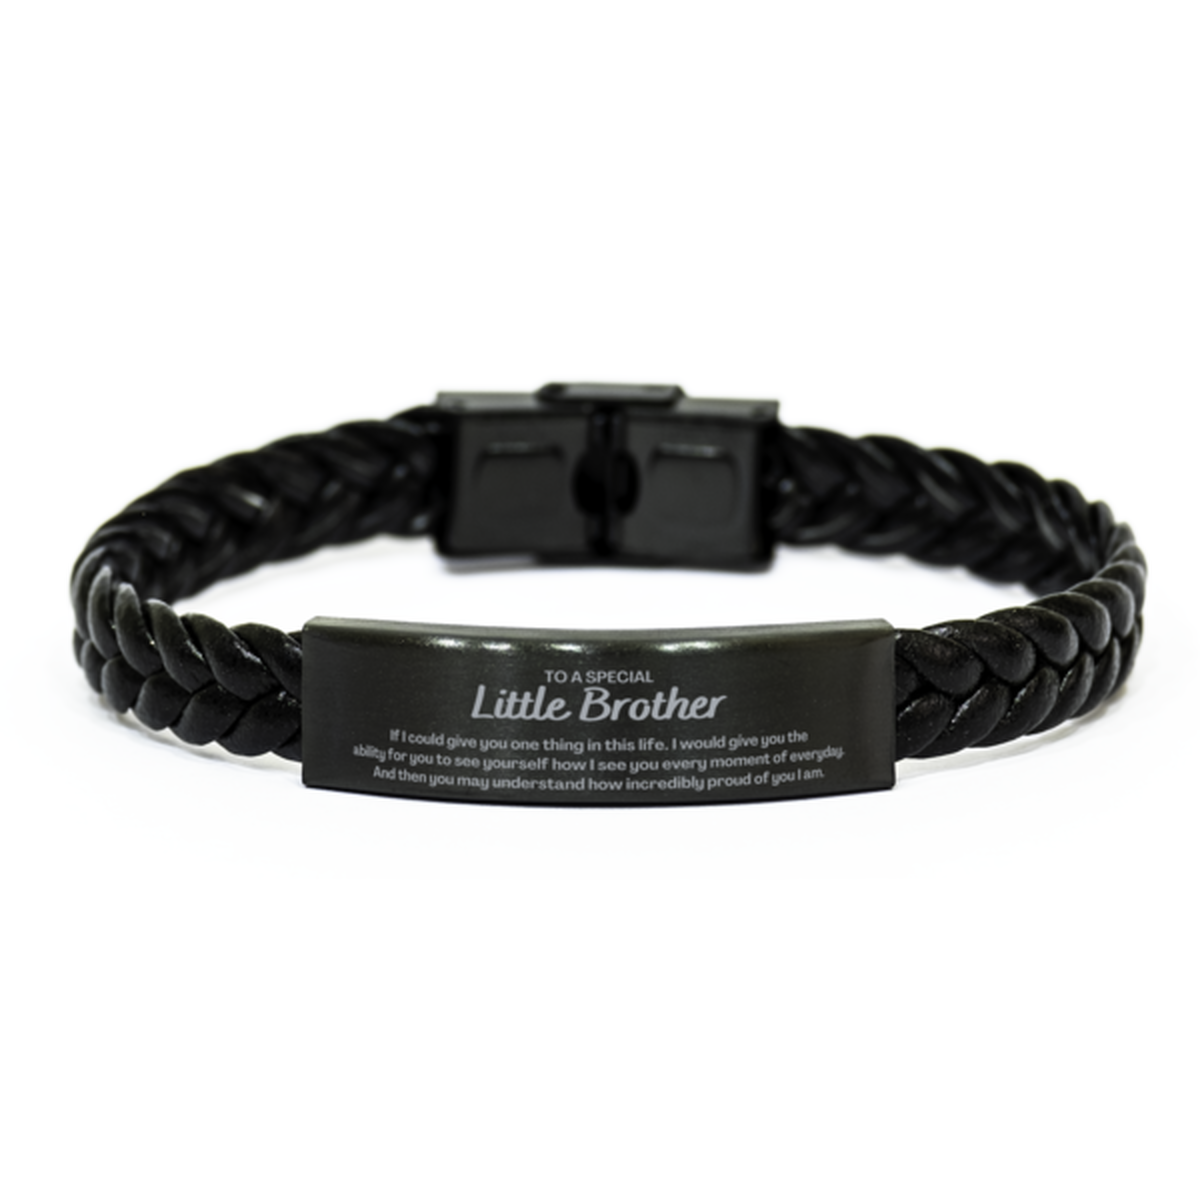 To My Little Brother Braided Leather Bracelet, Gifts For Little Brother Engraved, Inspirational Gifts for Christmas Birthday, Epic Gifts for Little Brother To A Special Little Brother how incredibly proud of you I am